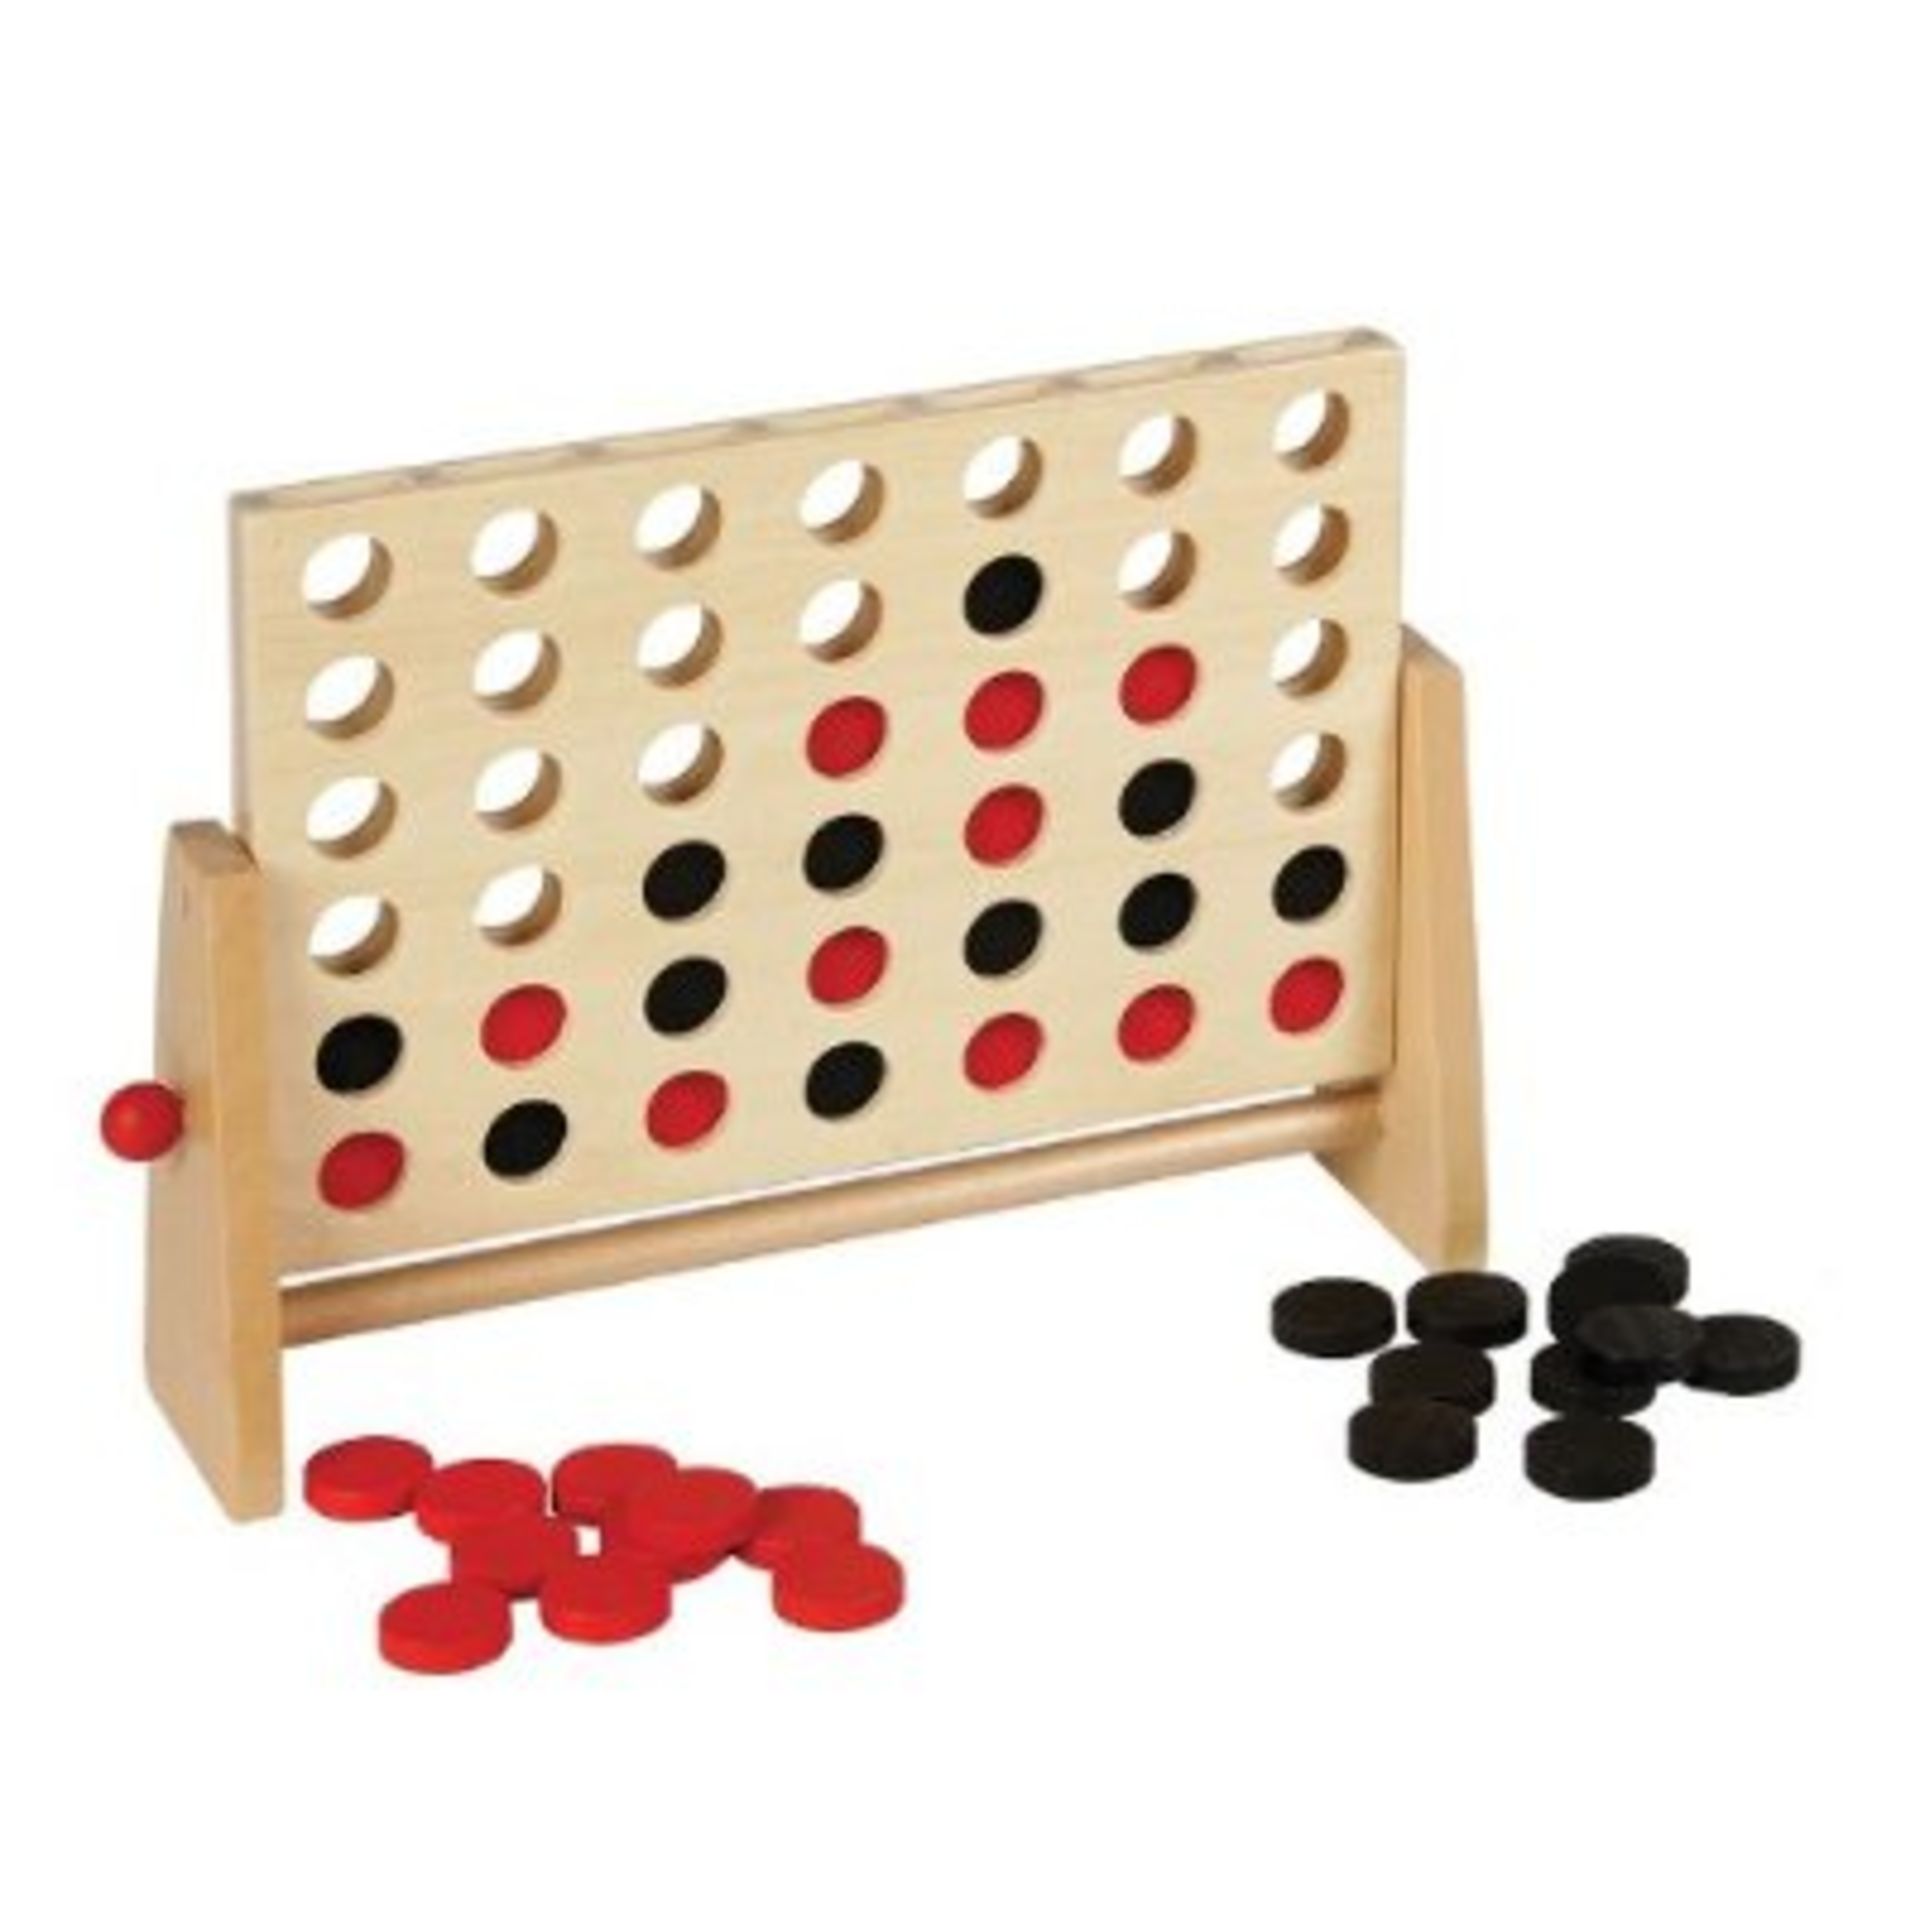 V Wooden Connect Four in a row game on swivel stand X  3  Bid price to be multiplied by Three - Image 3 of 3